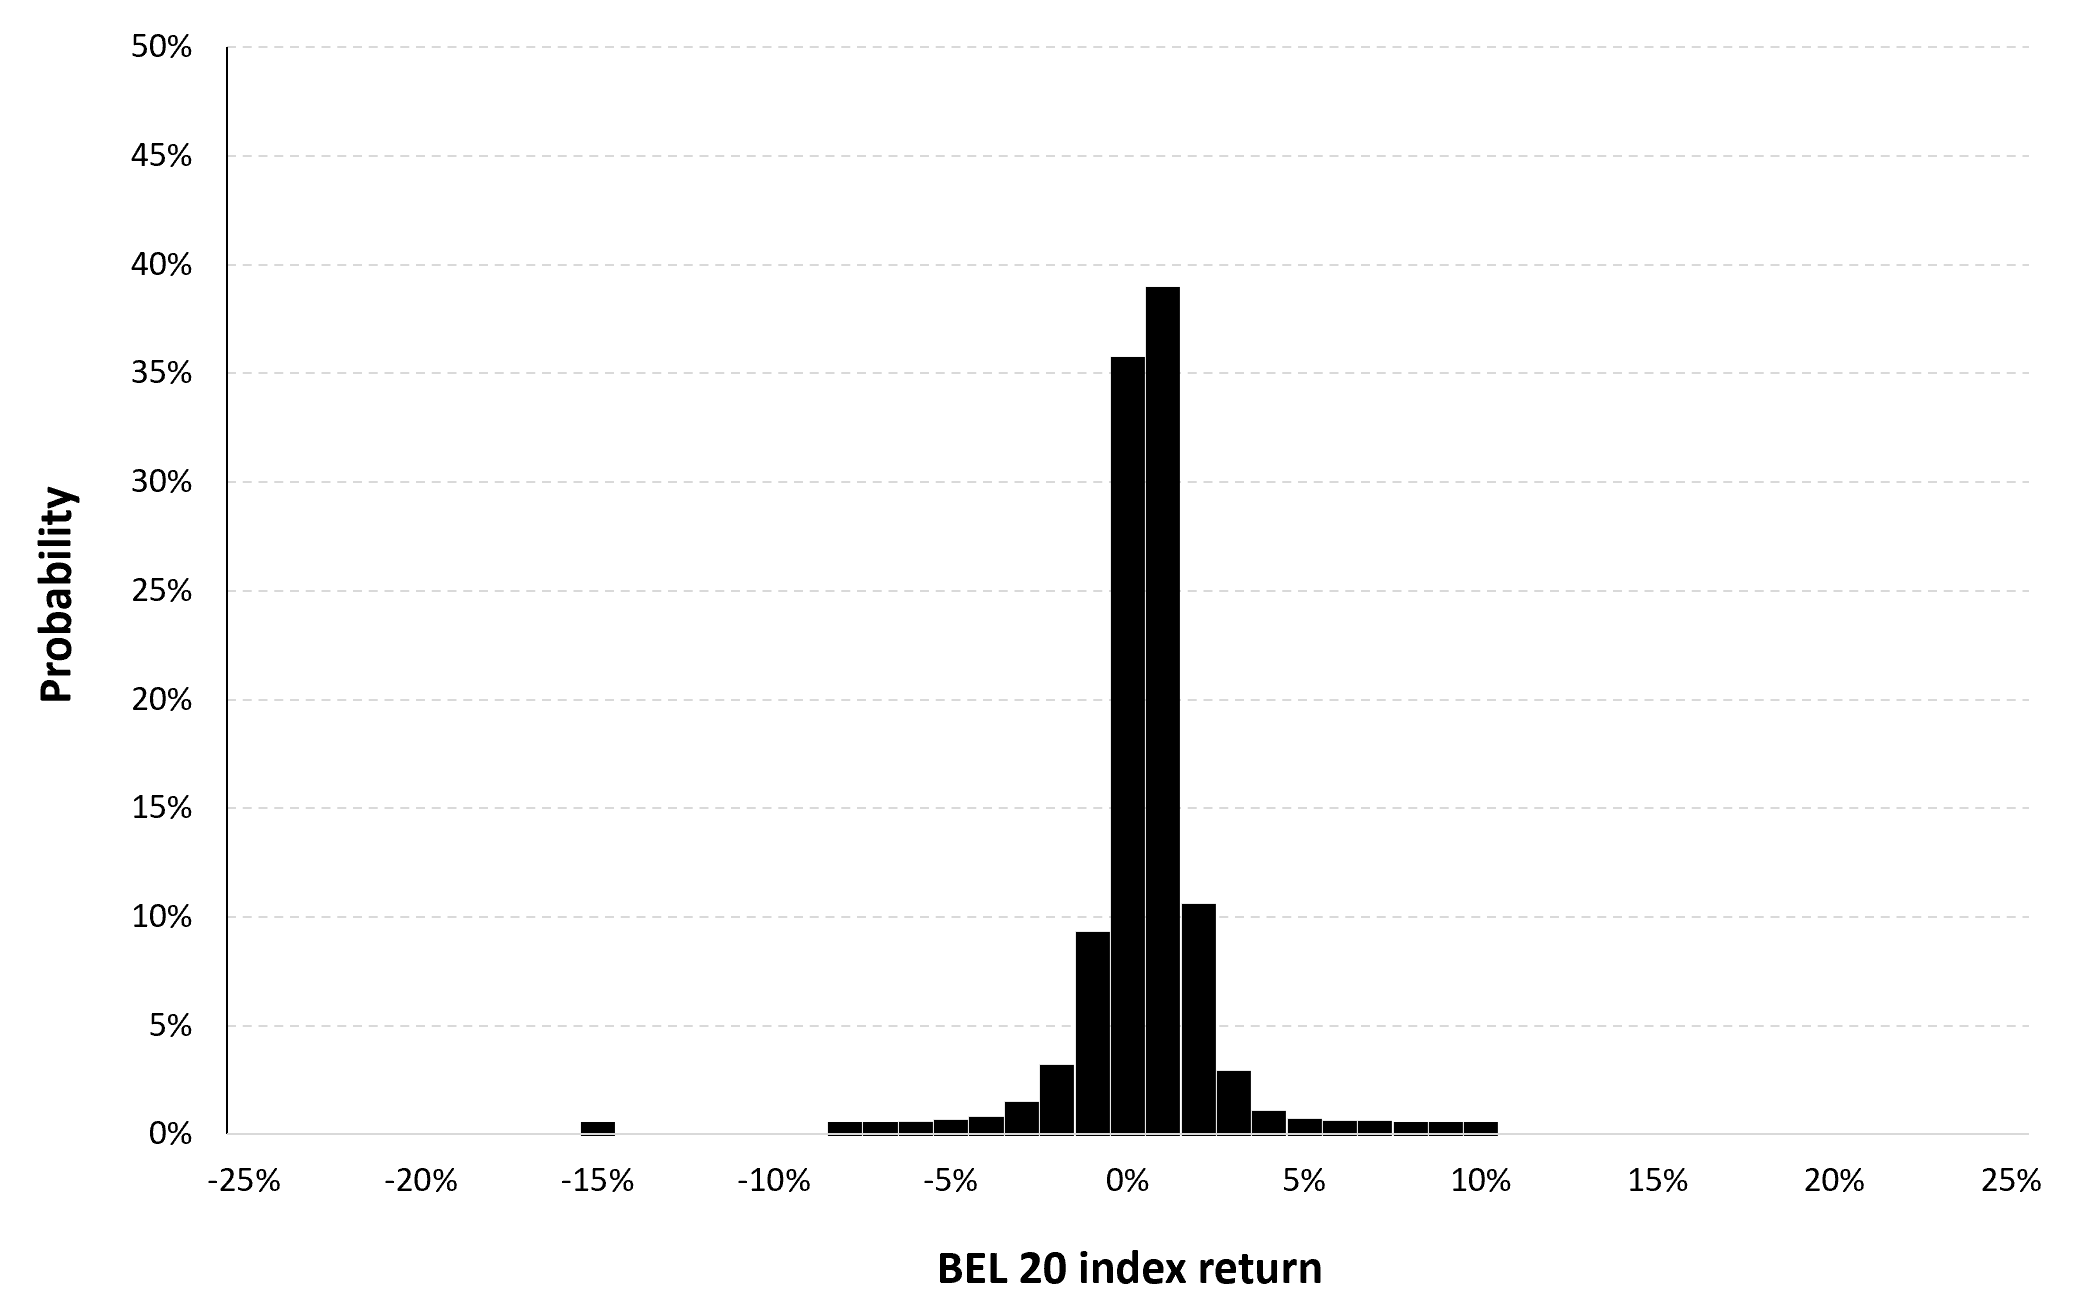 Historical distribution of the daily BEL 20 index returns